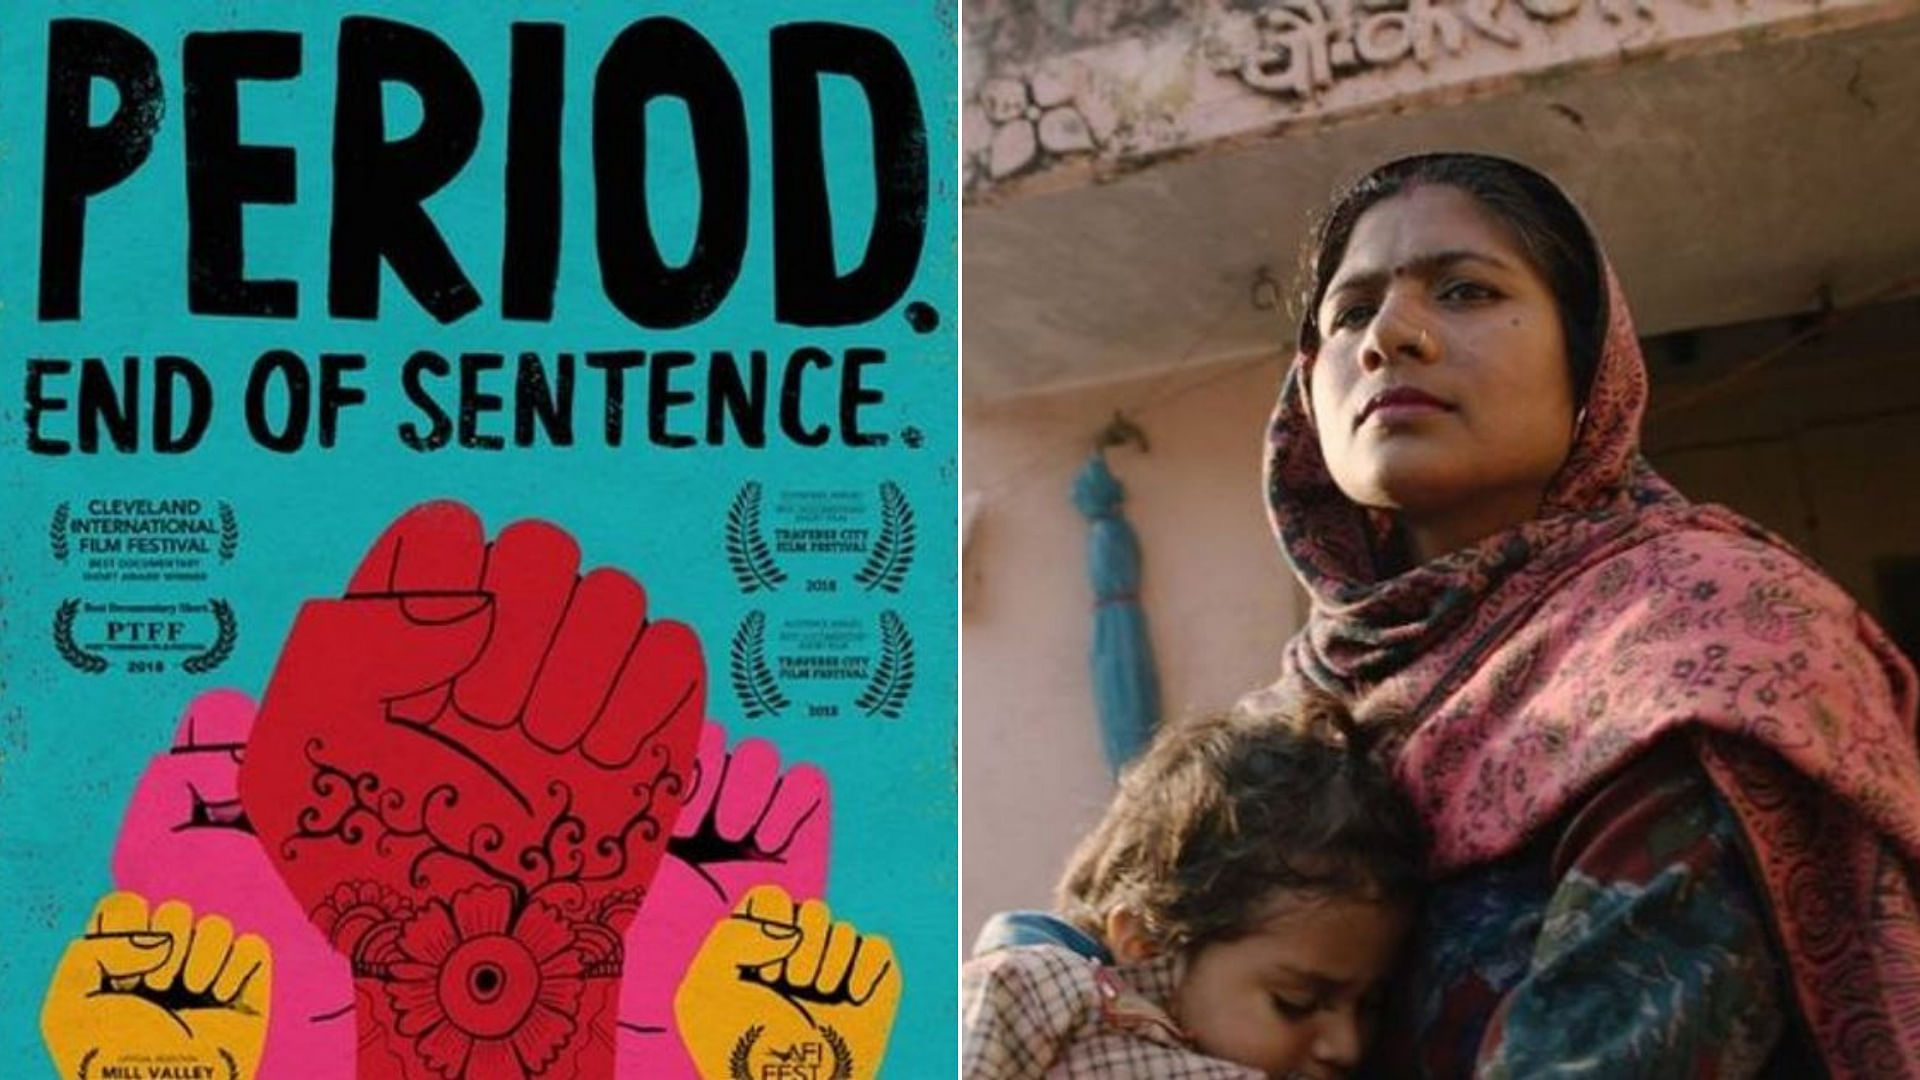 ‘Period. End of Sentence.’ is a documentary on menstruation issues in rural India.